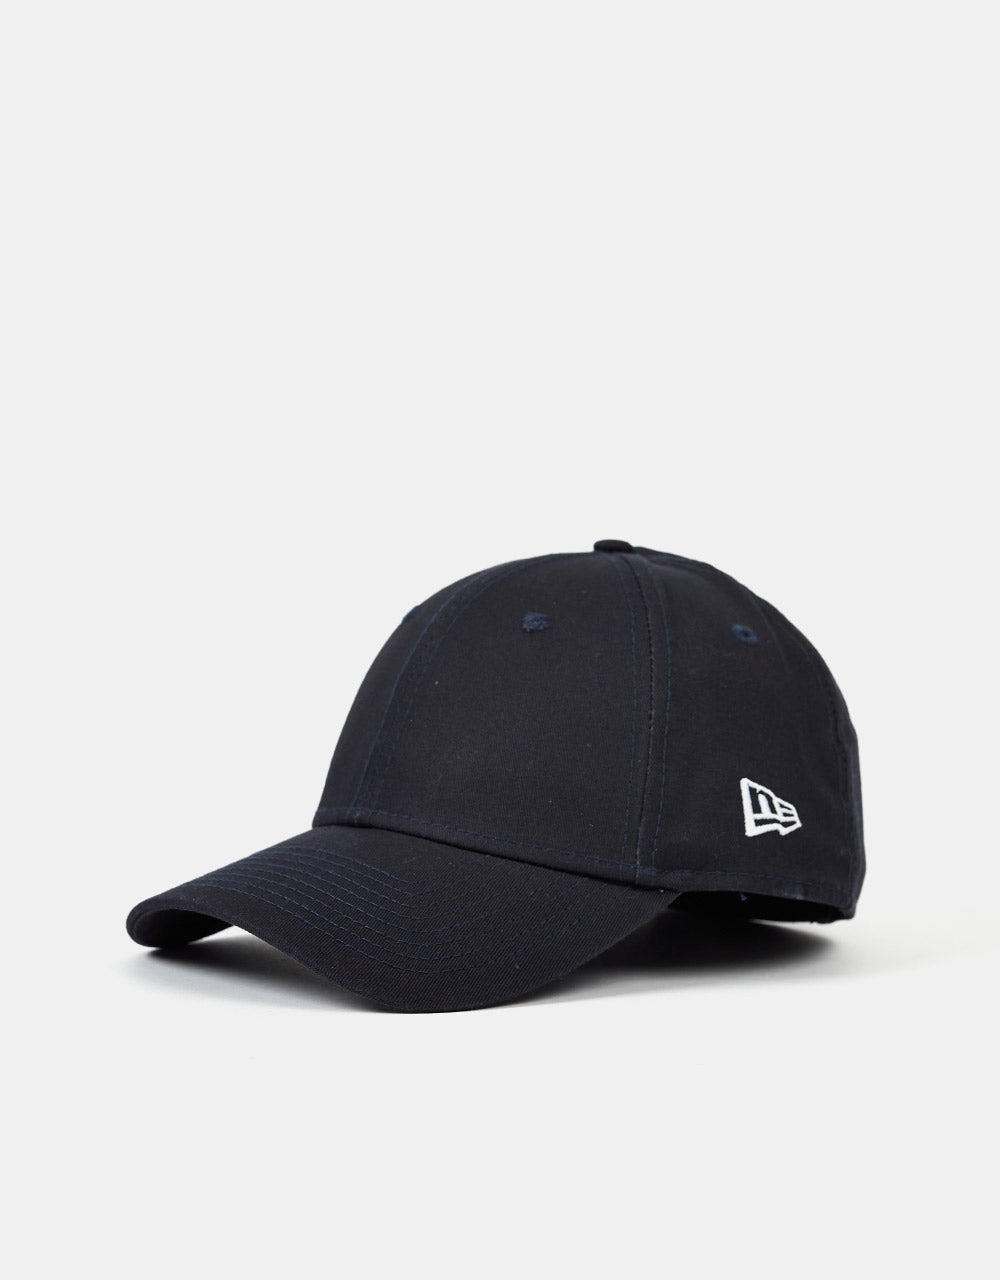 New Era 9Forty Flag Collection Cap - Navy/White